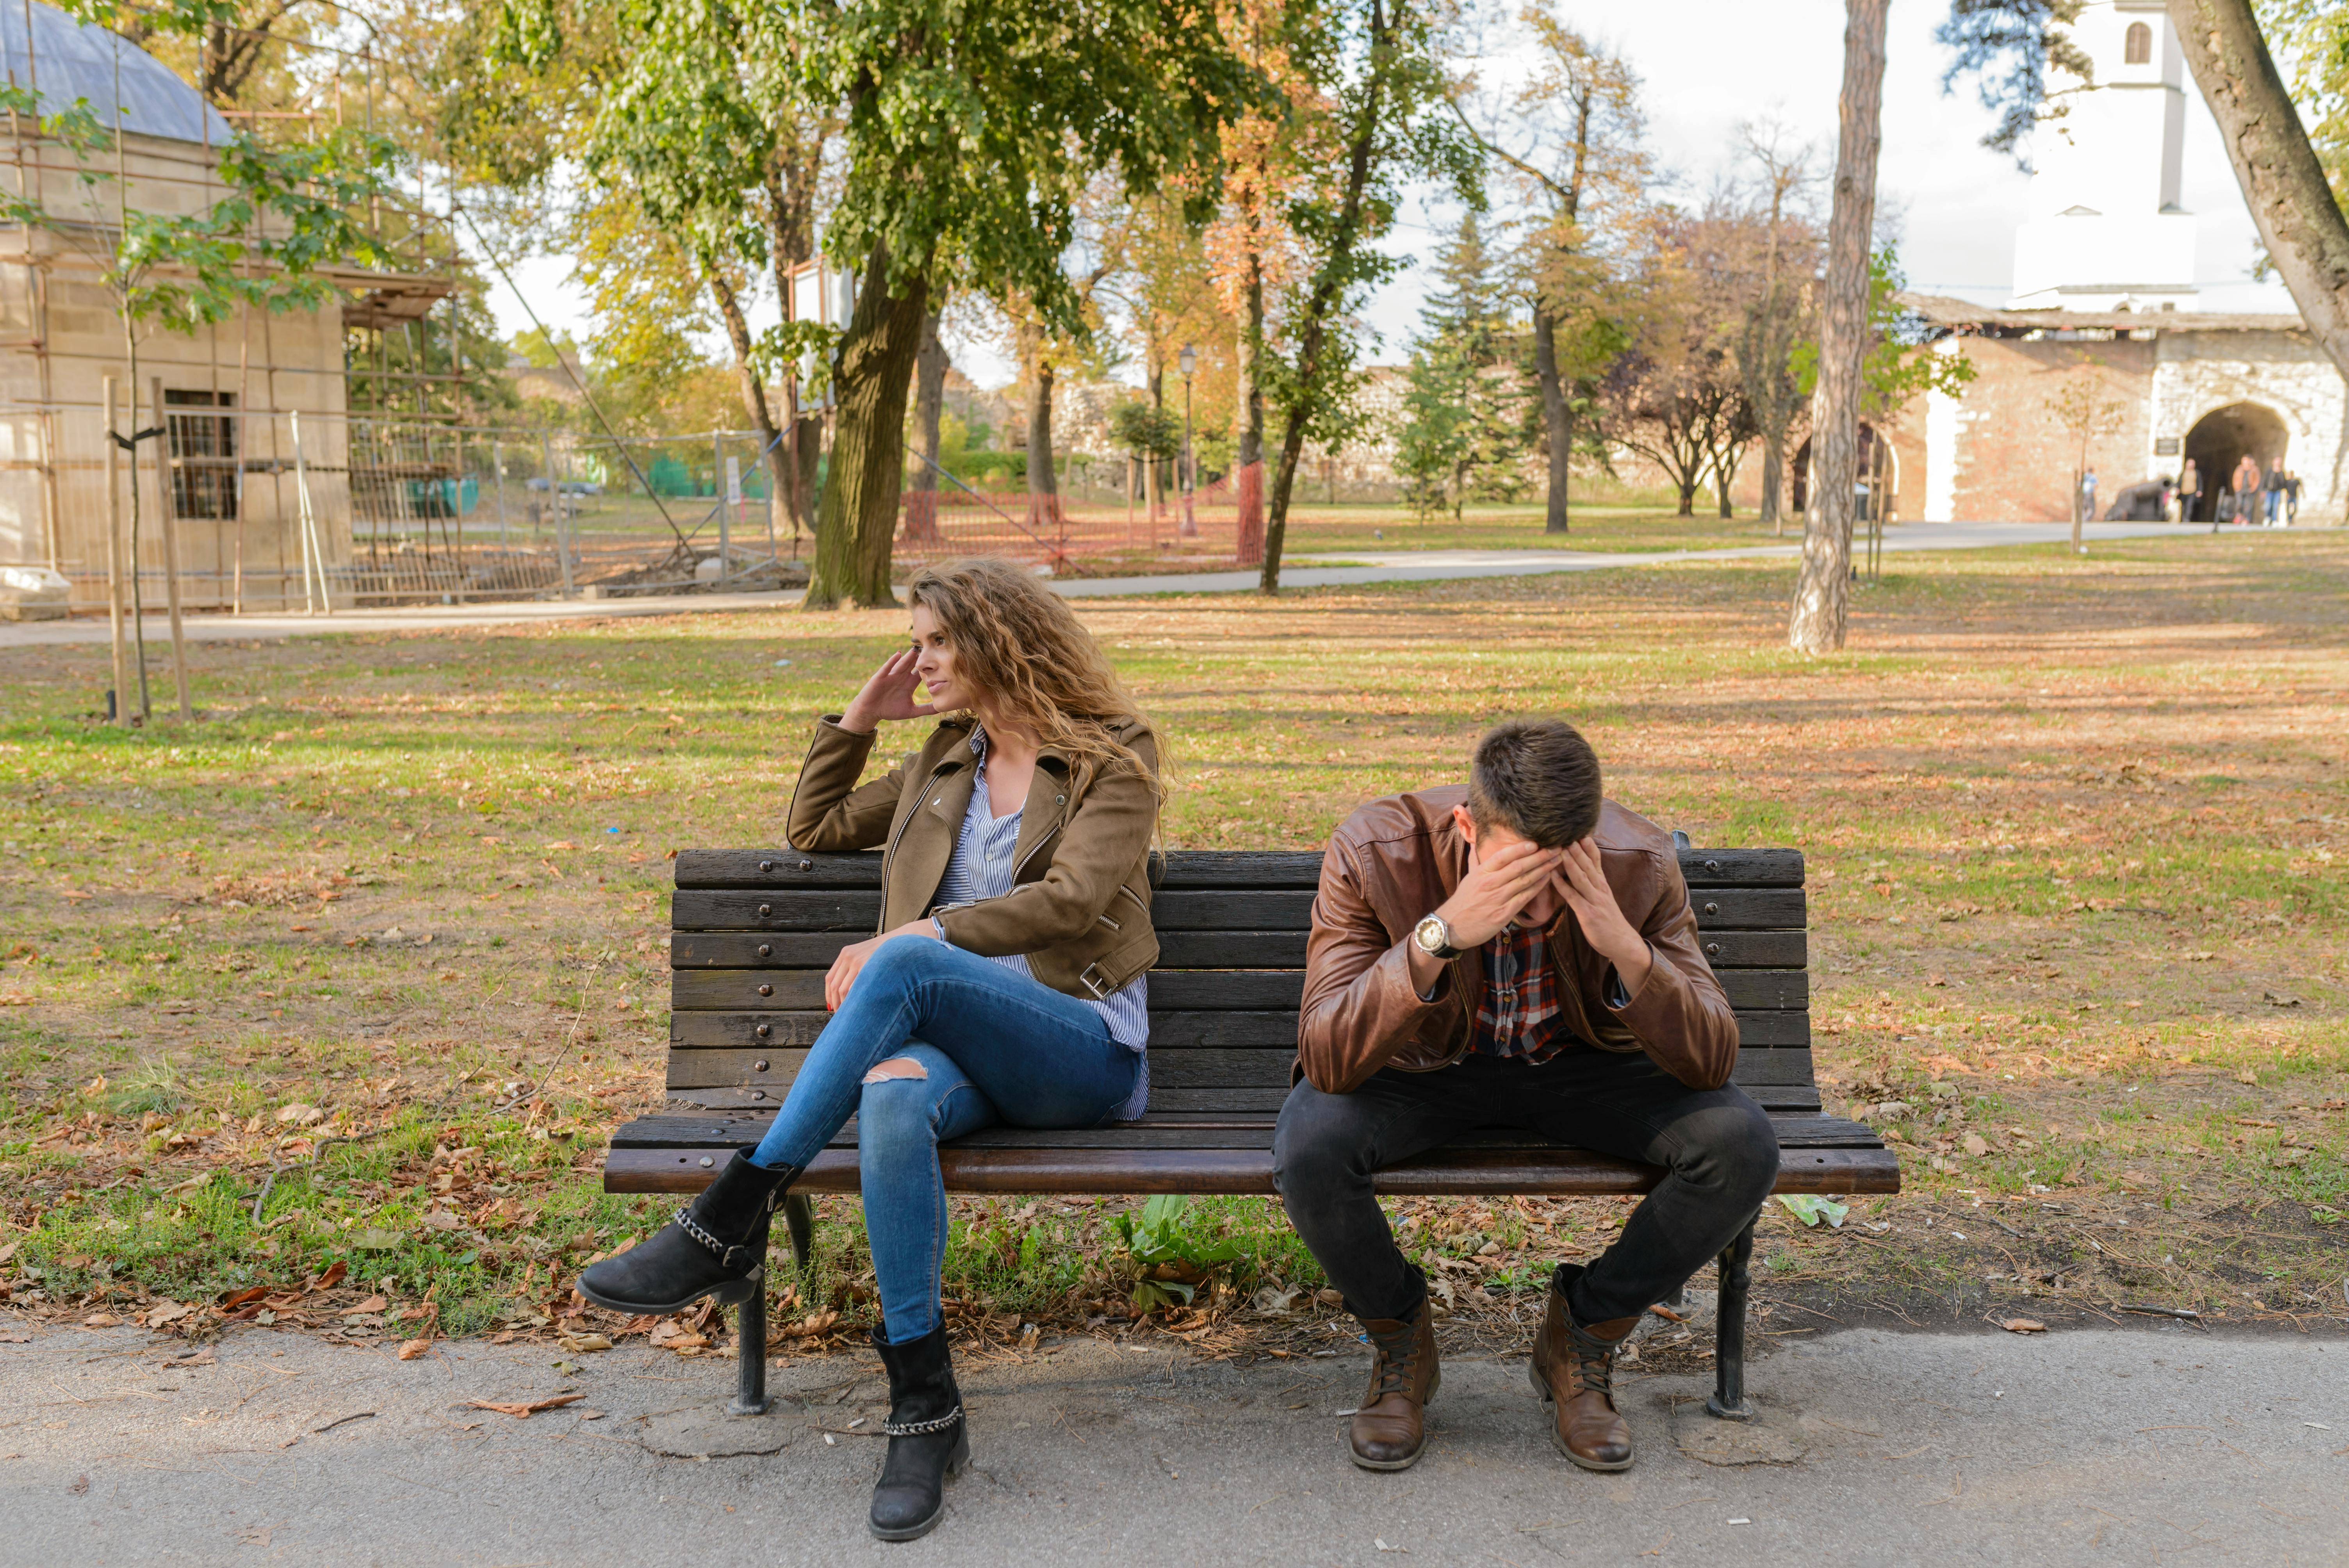 An angry woman sitting next to a crying man on a park bench | Source: Pexels